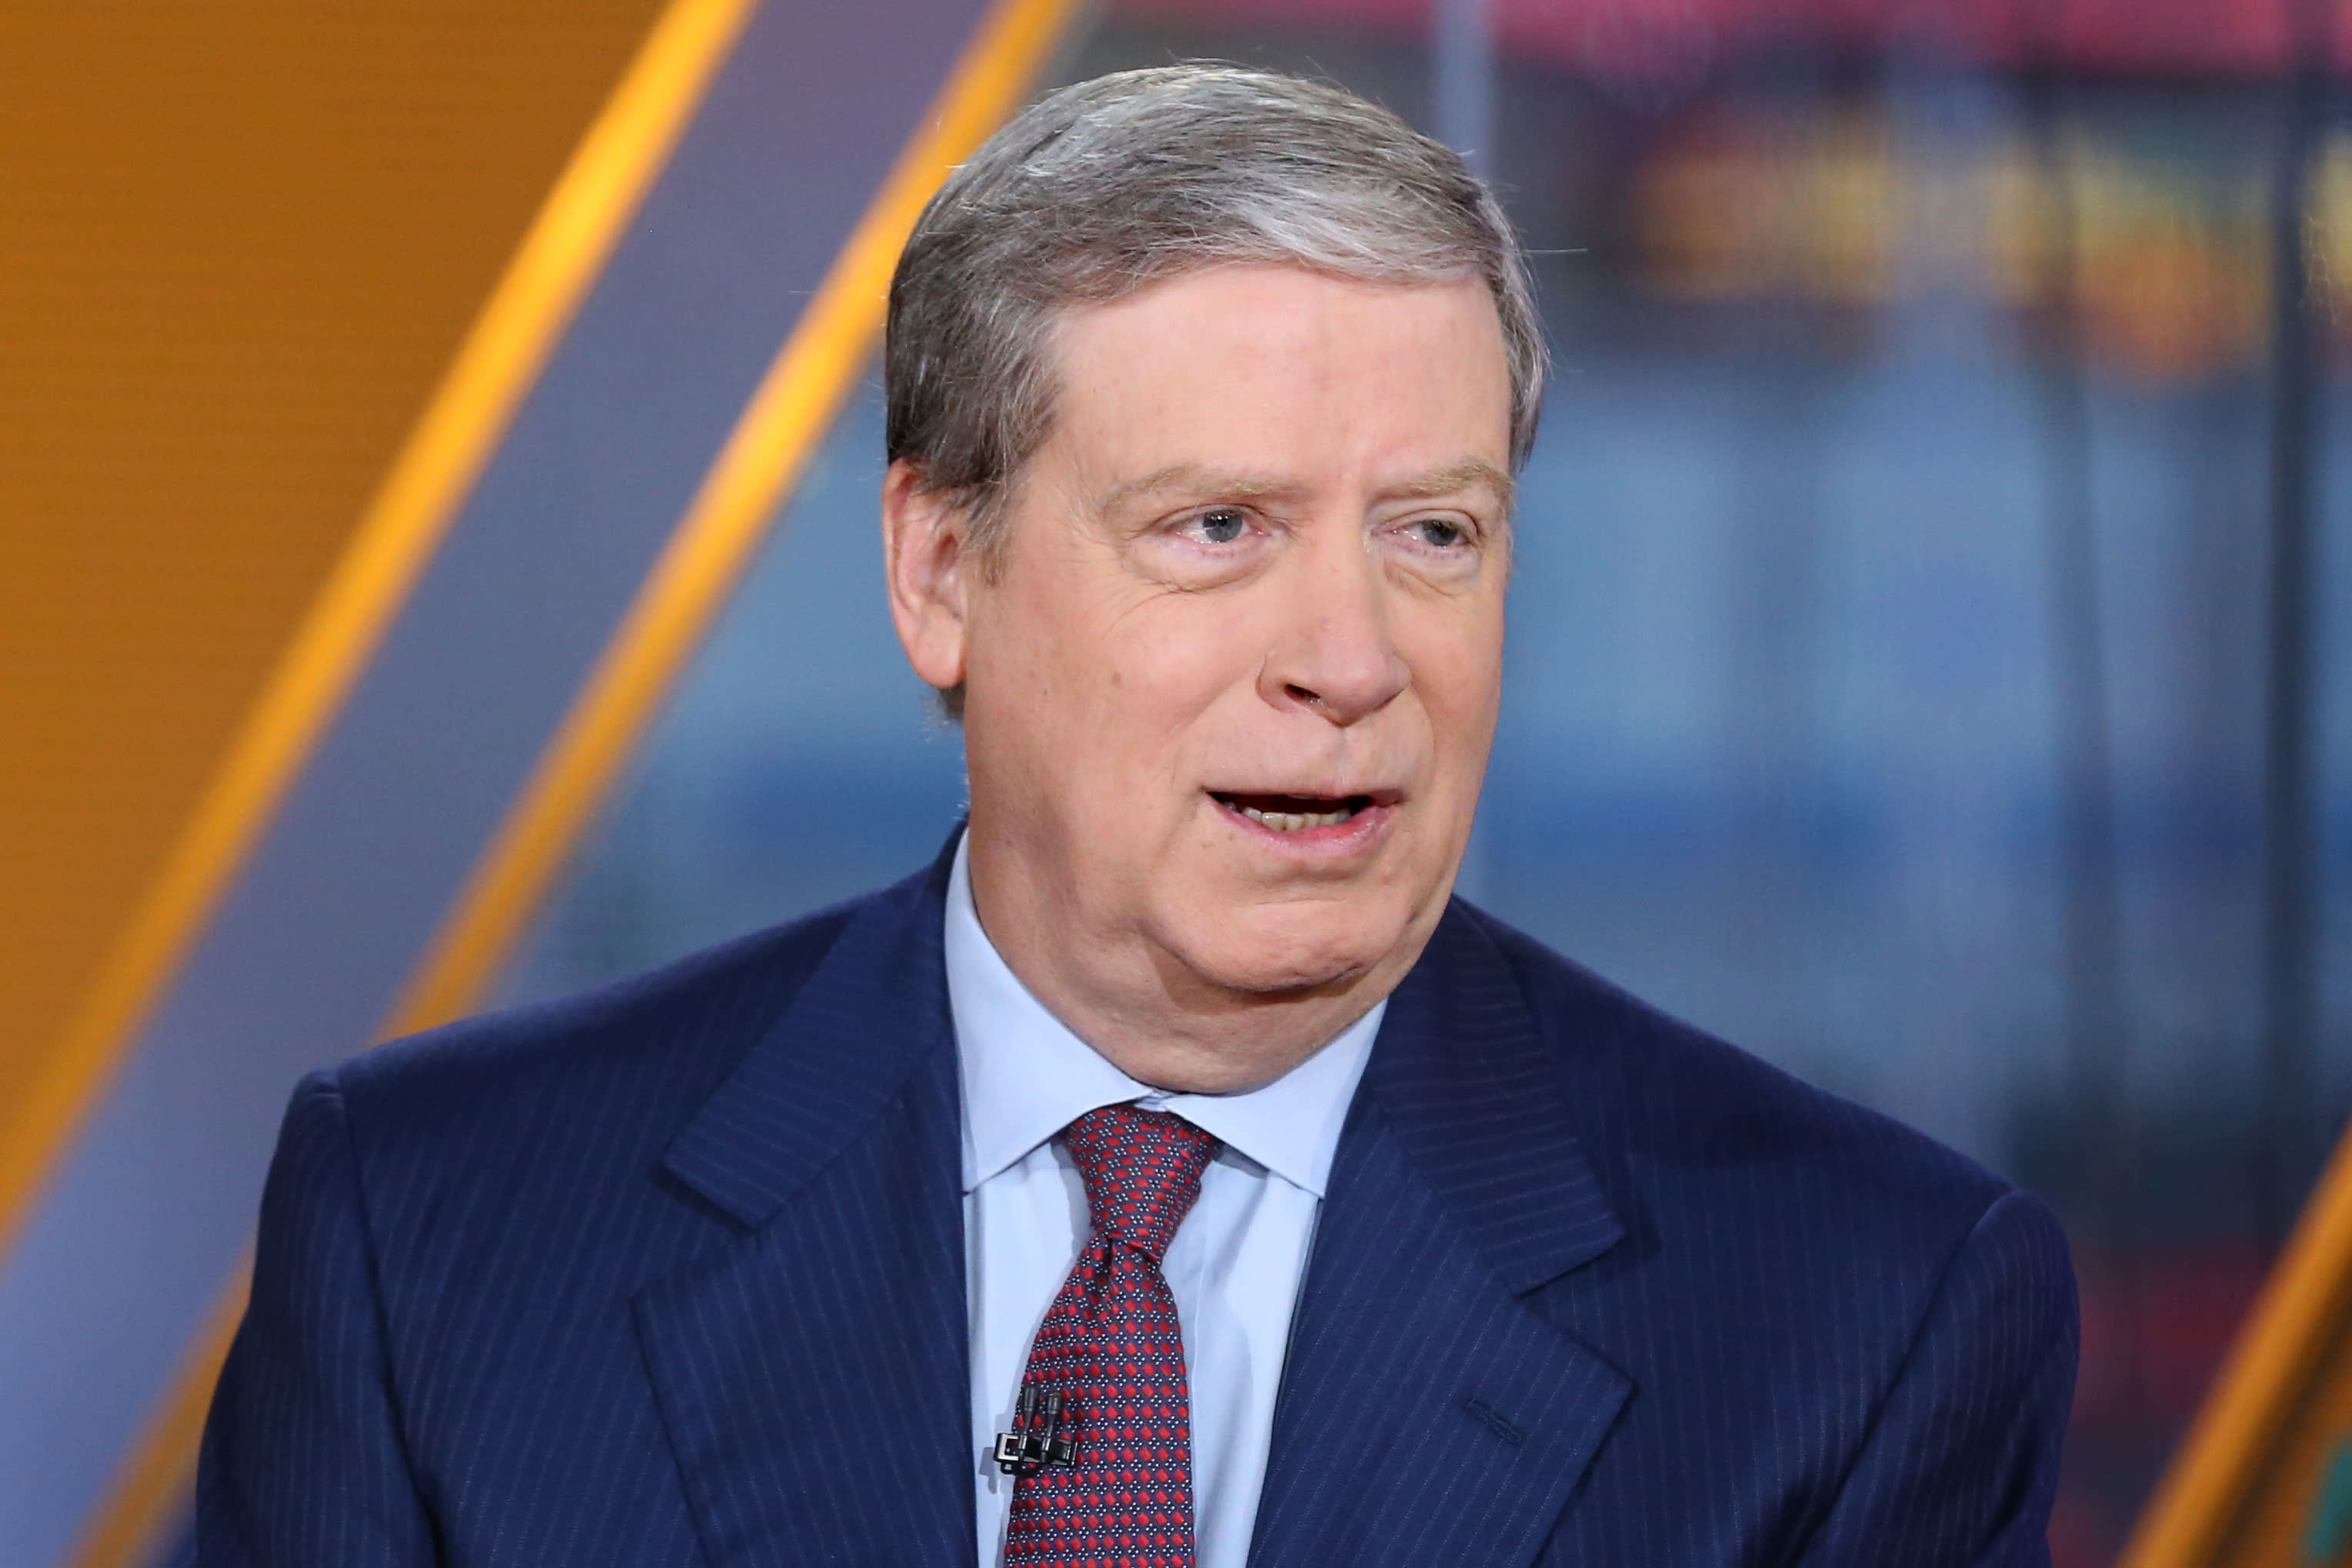 Stanley Druckenmiller piles into these A.I. plays and other technology stocks